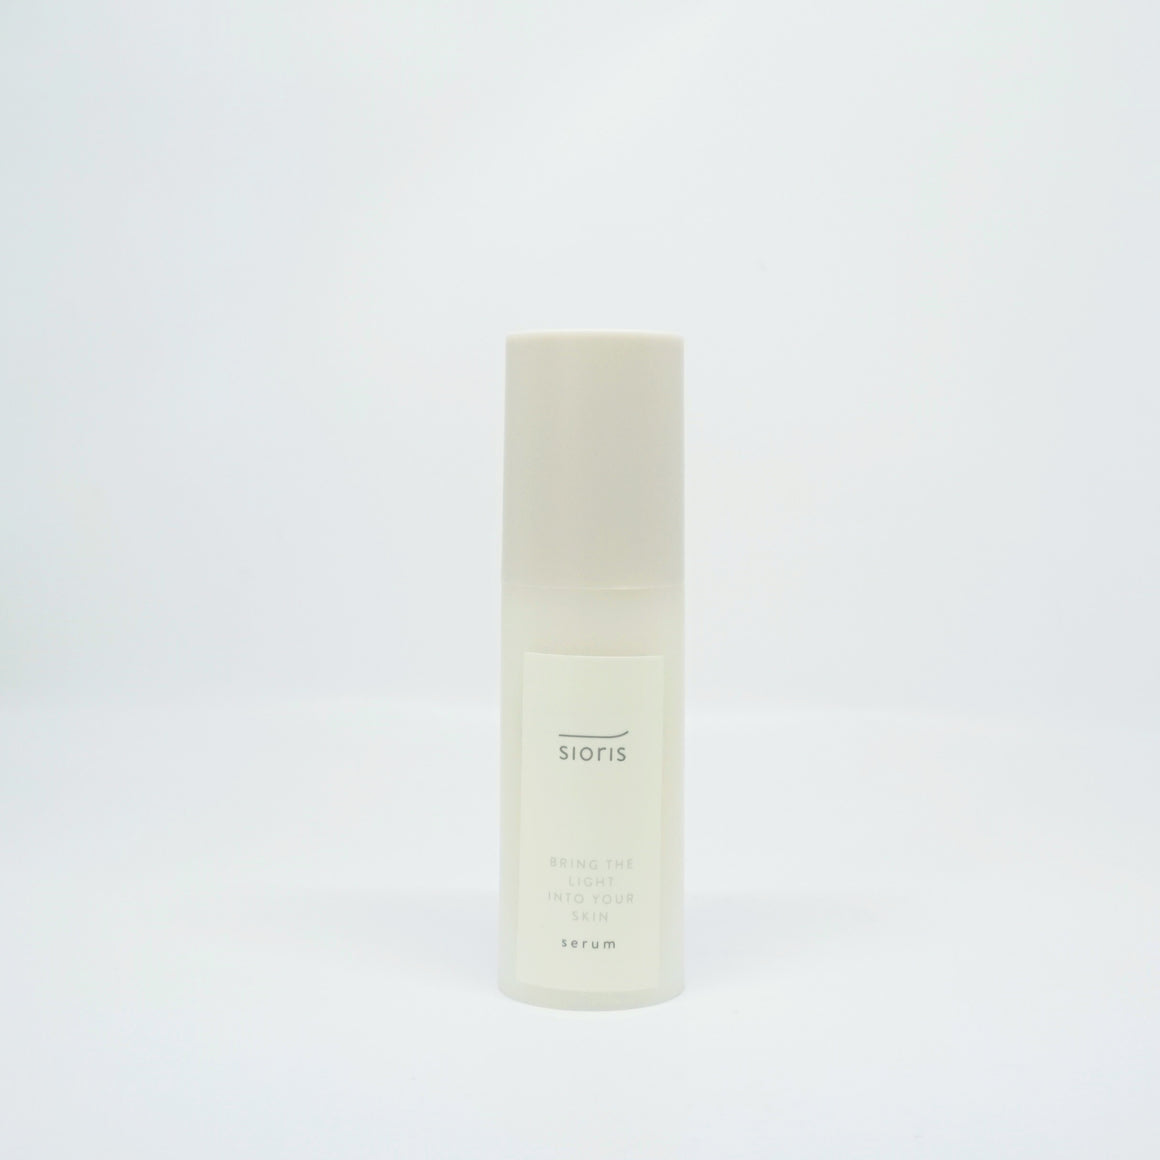 SIORIS Bring the Light Into Your Skin Serum [EXP 08.03.2019]